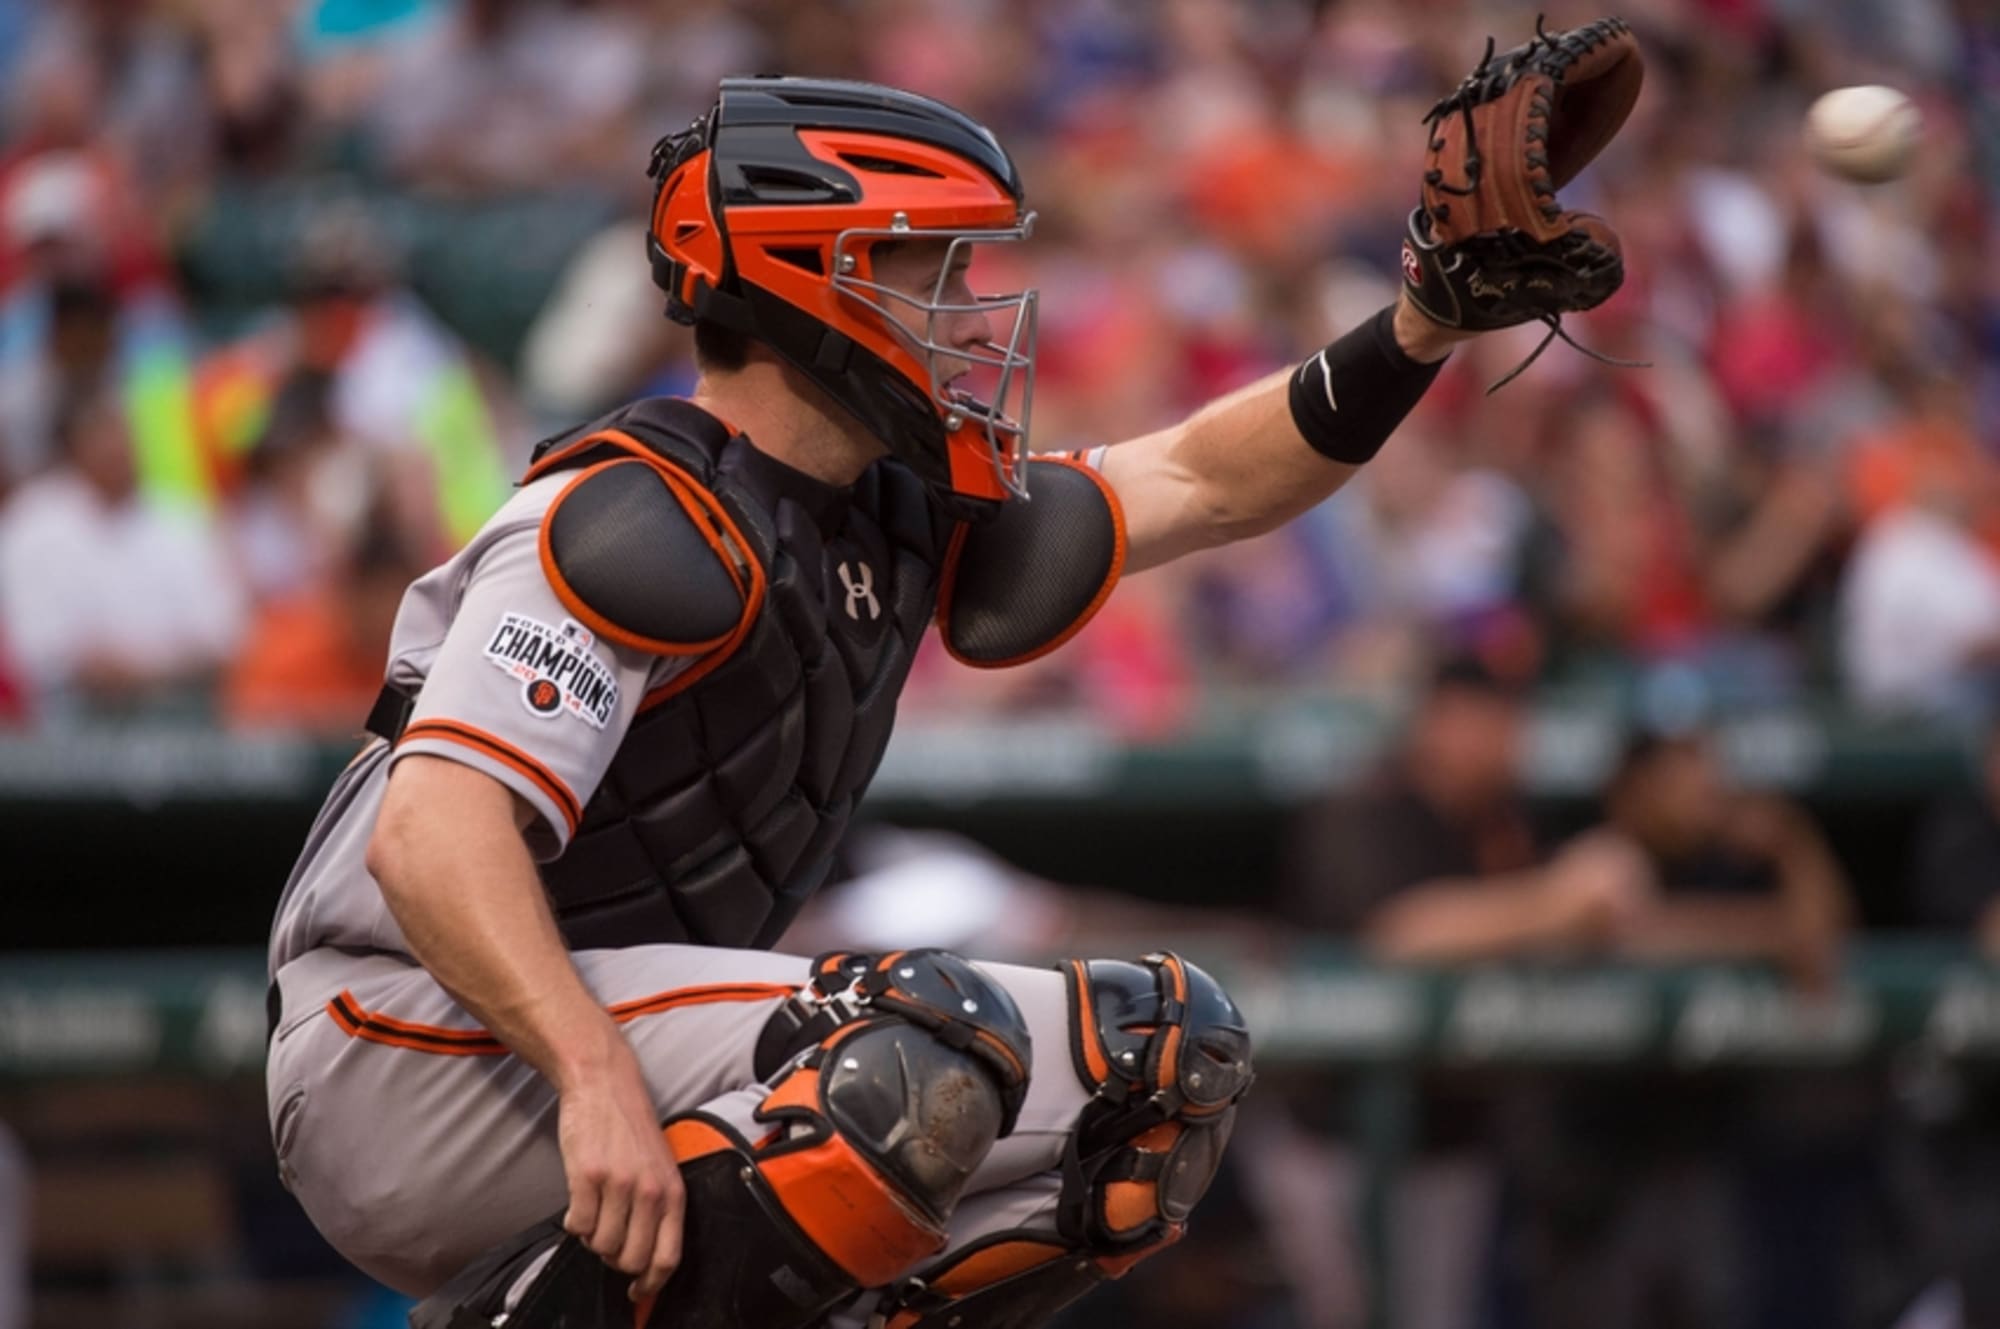 Encouraging news for Giants: no concussion for Buster Posey, could